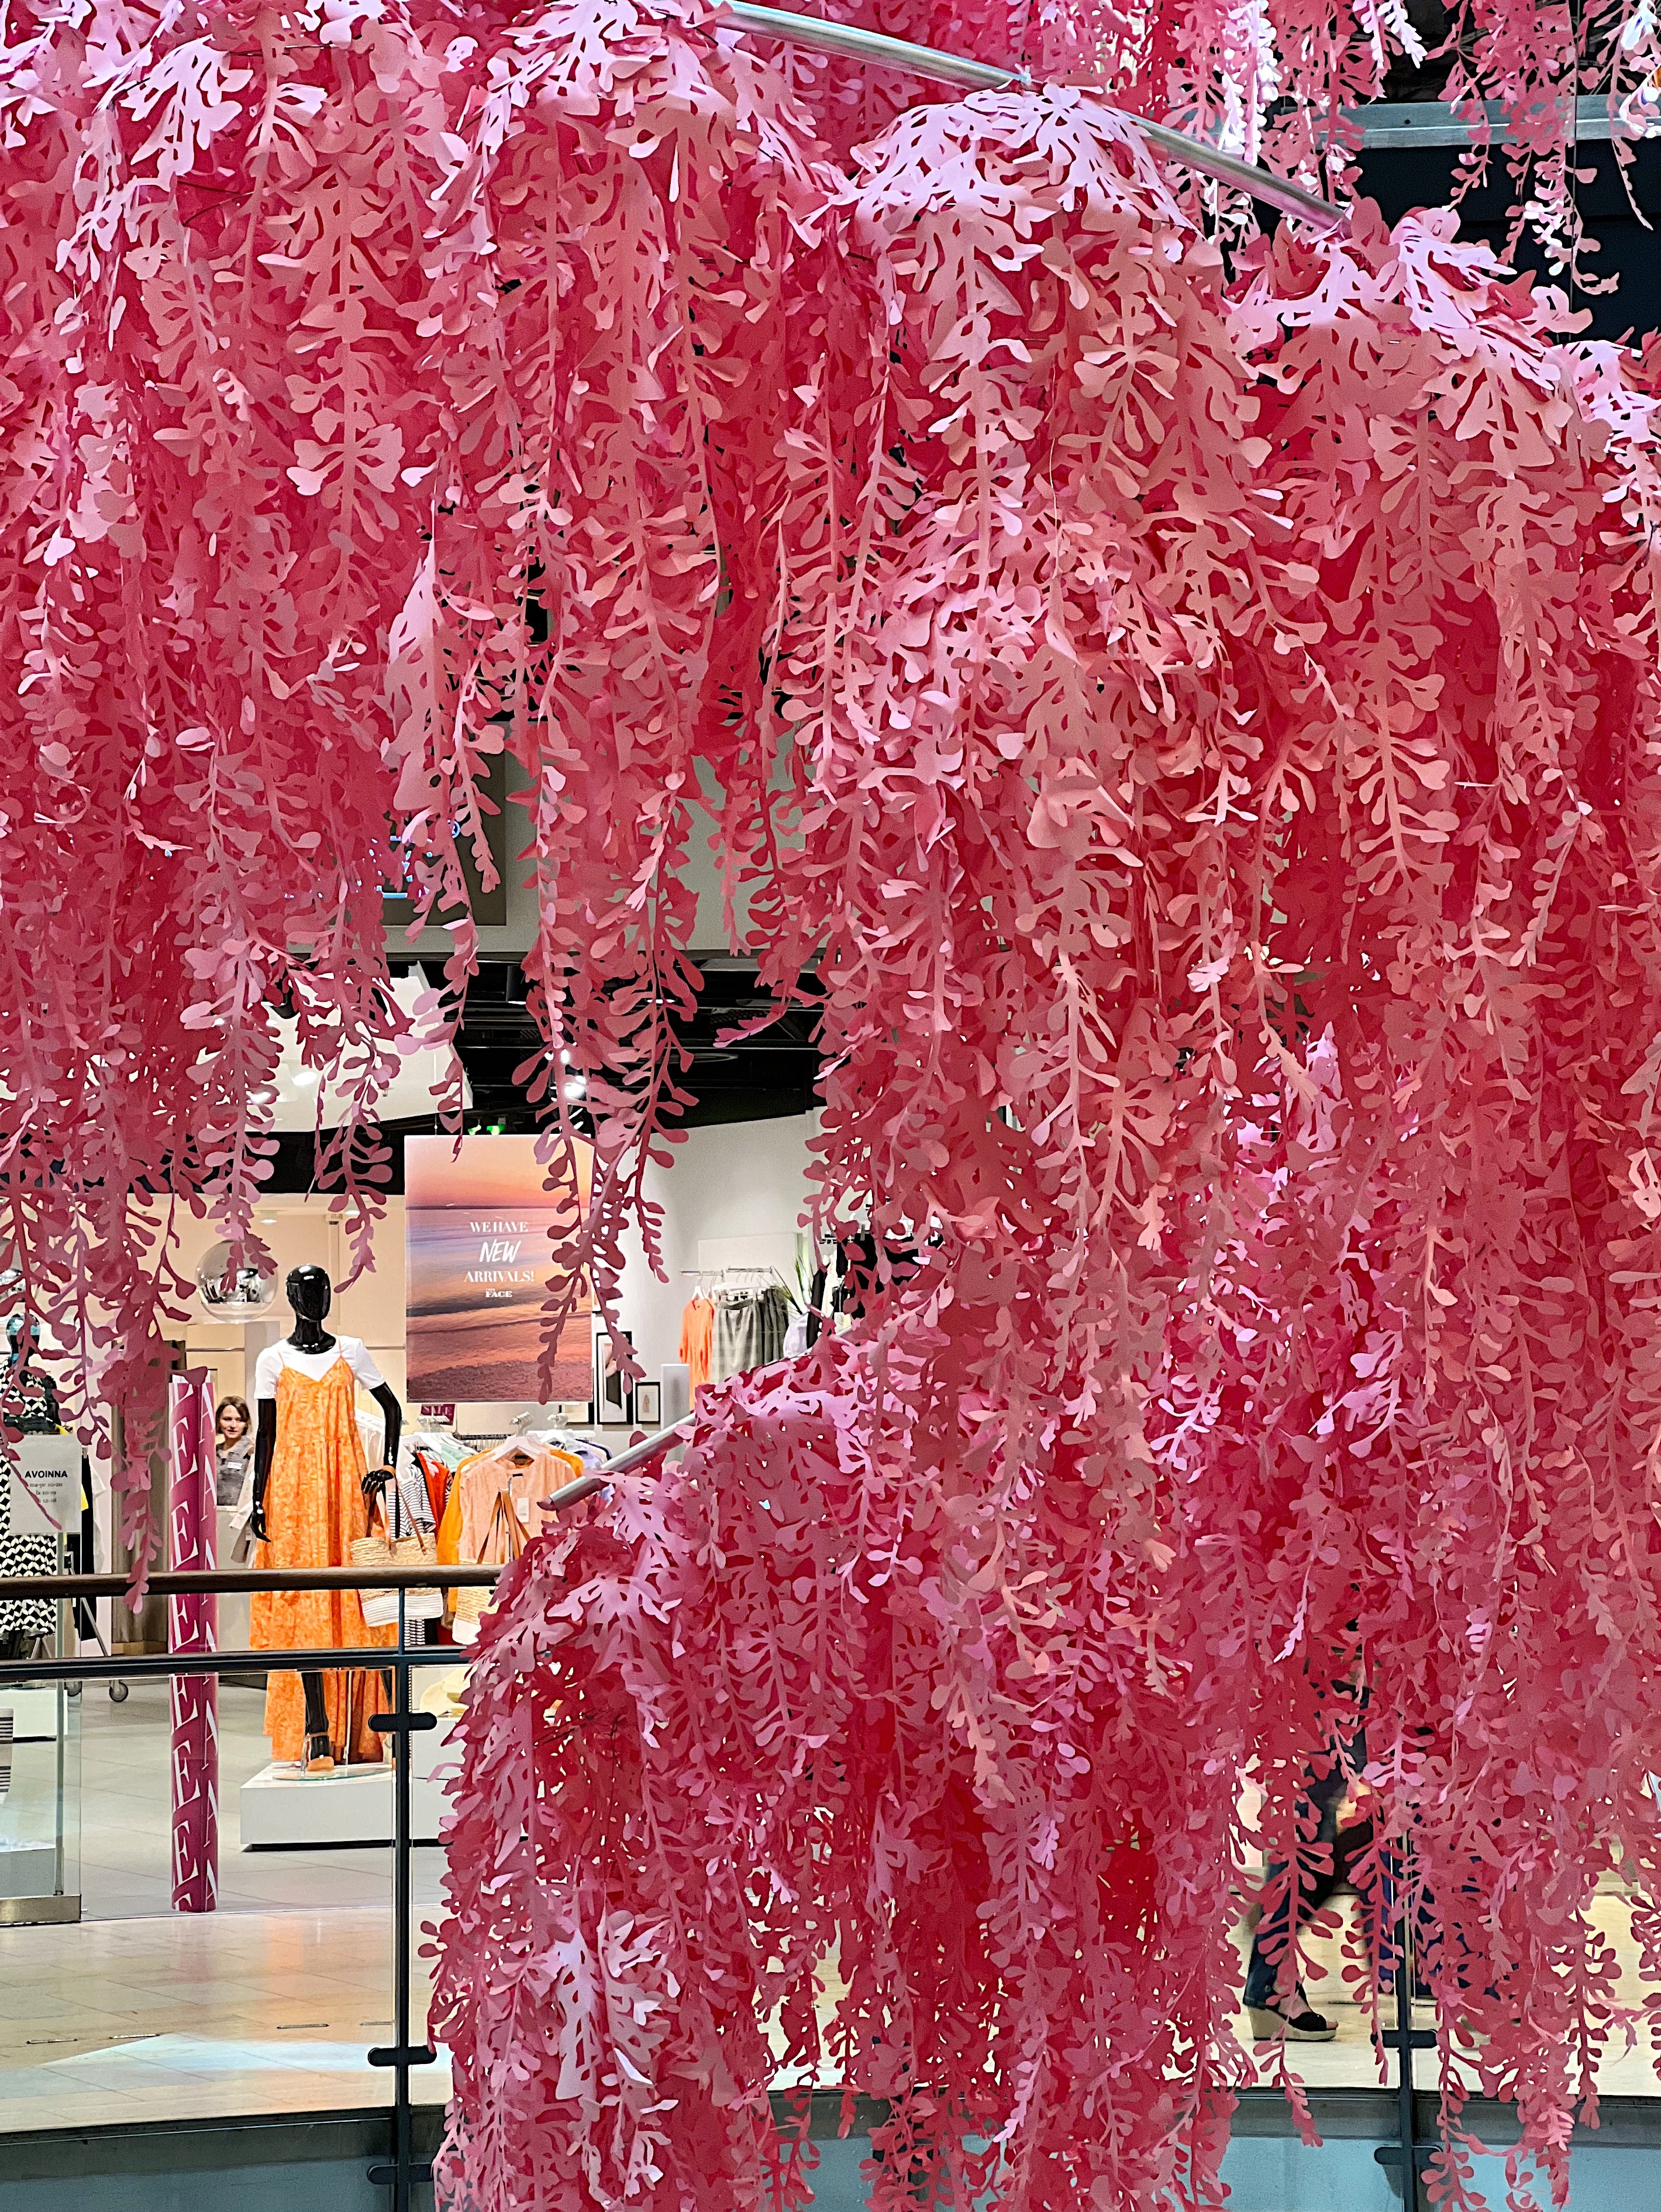 Art Meets Architecture: Vogue's Spotlight on Kammpi's Ethereal Hanging Visterias